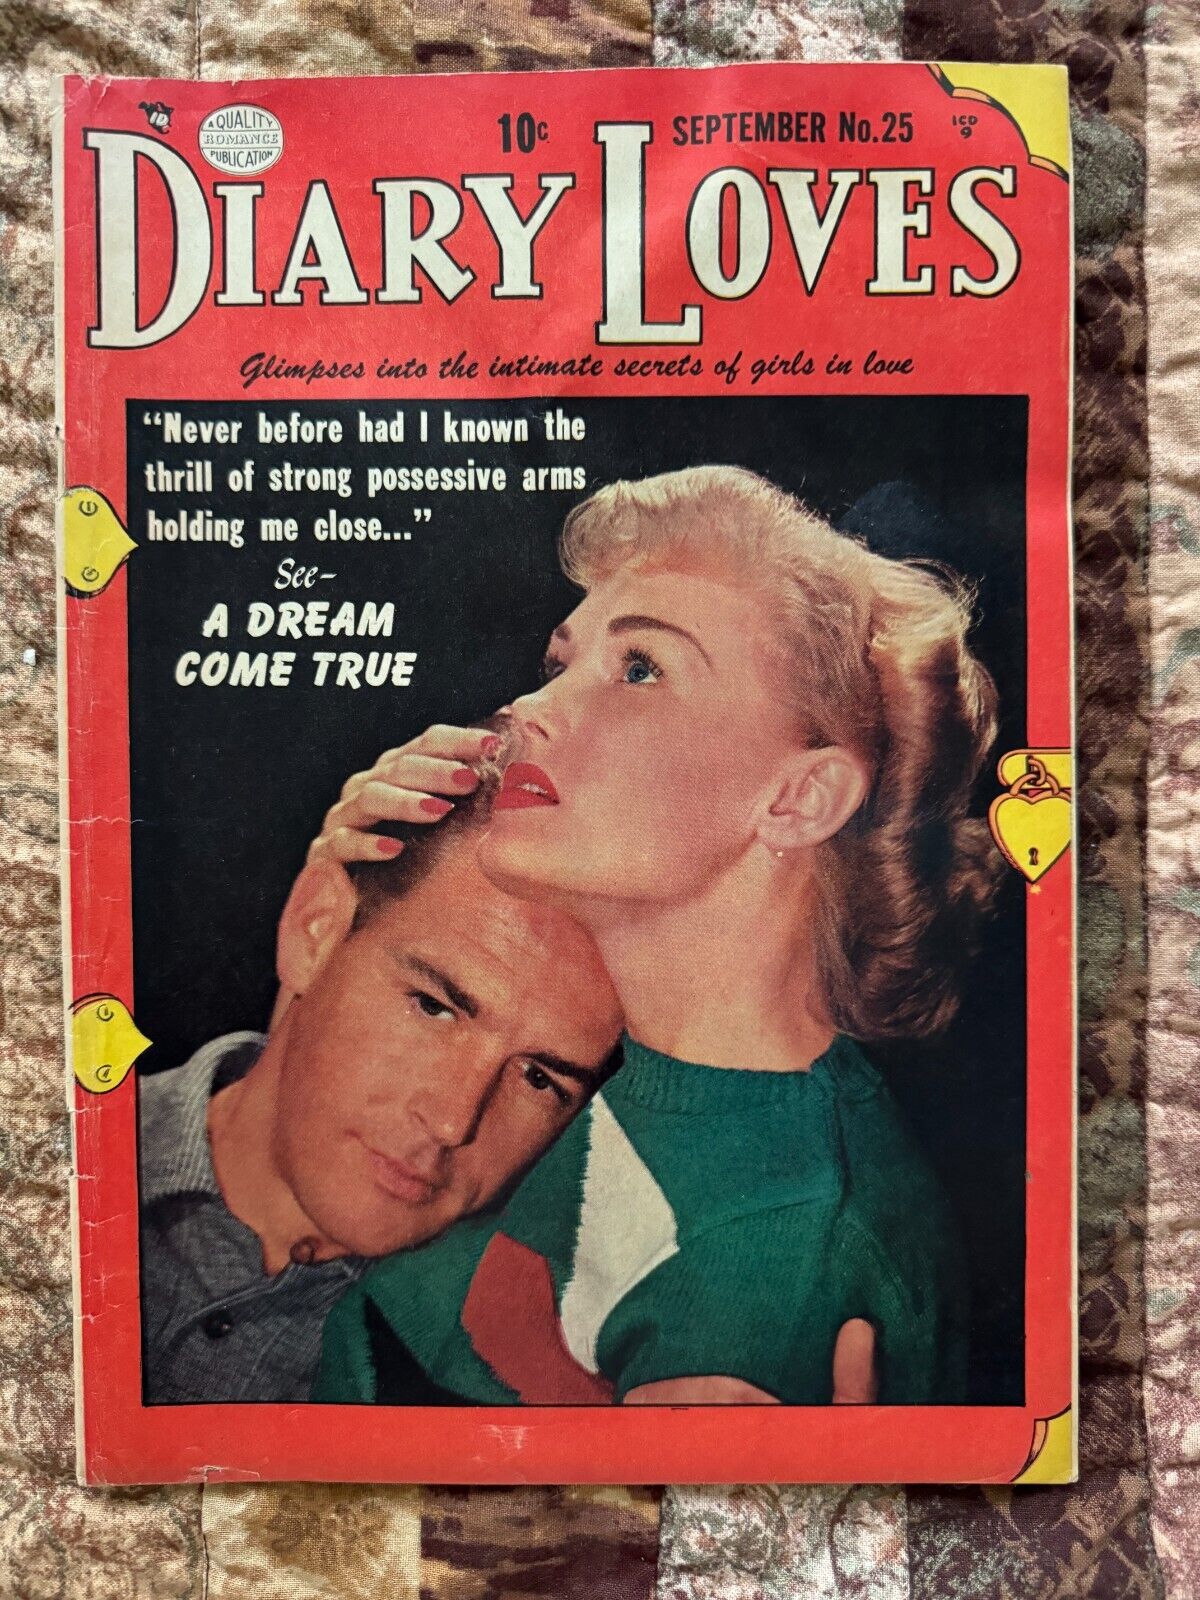 Diary Loves #25 (VG+ 4.5) Quality Comics Sept 1952 FORTE/WARD. Photo cover. (2)